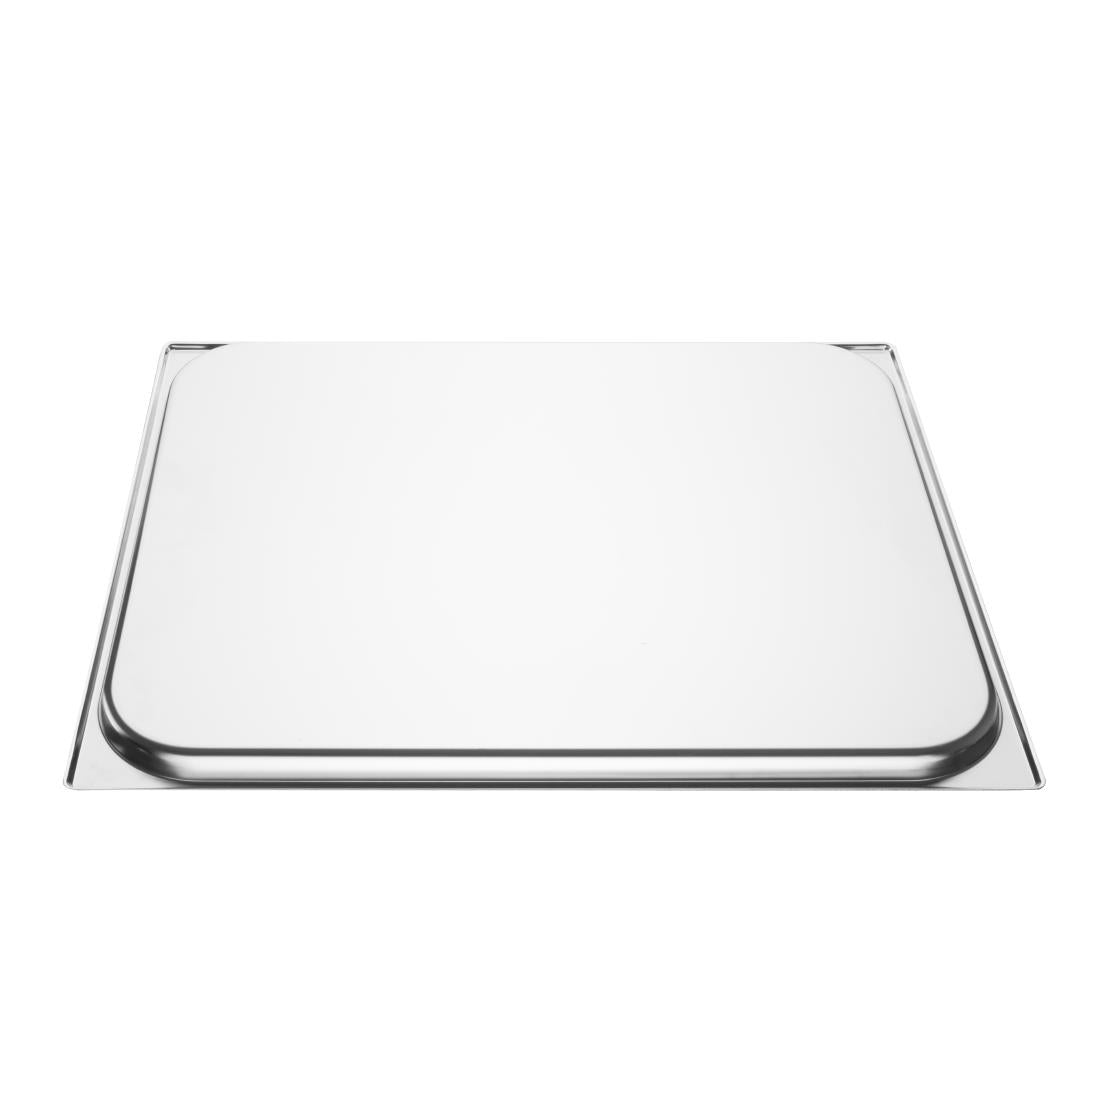 GM316 Vogue Stainless Steel 2/1 Gastronorm Pan 20mm